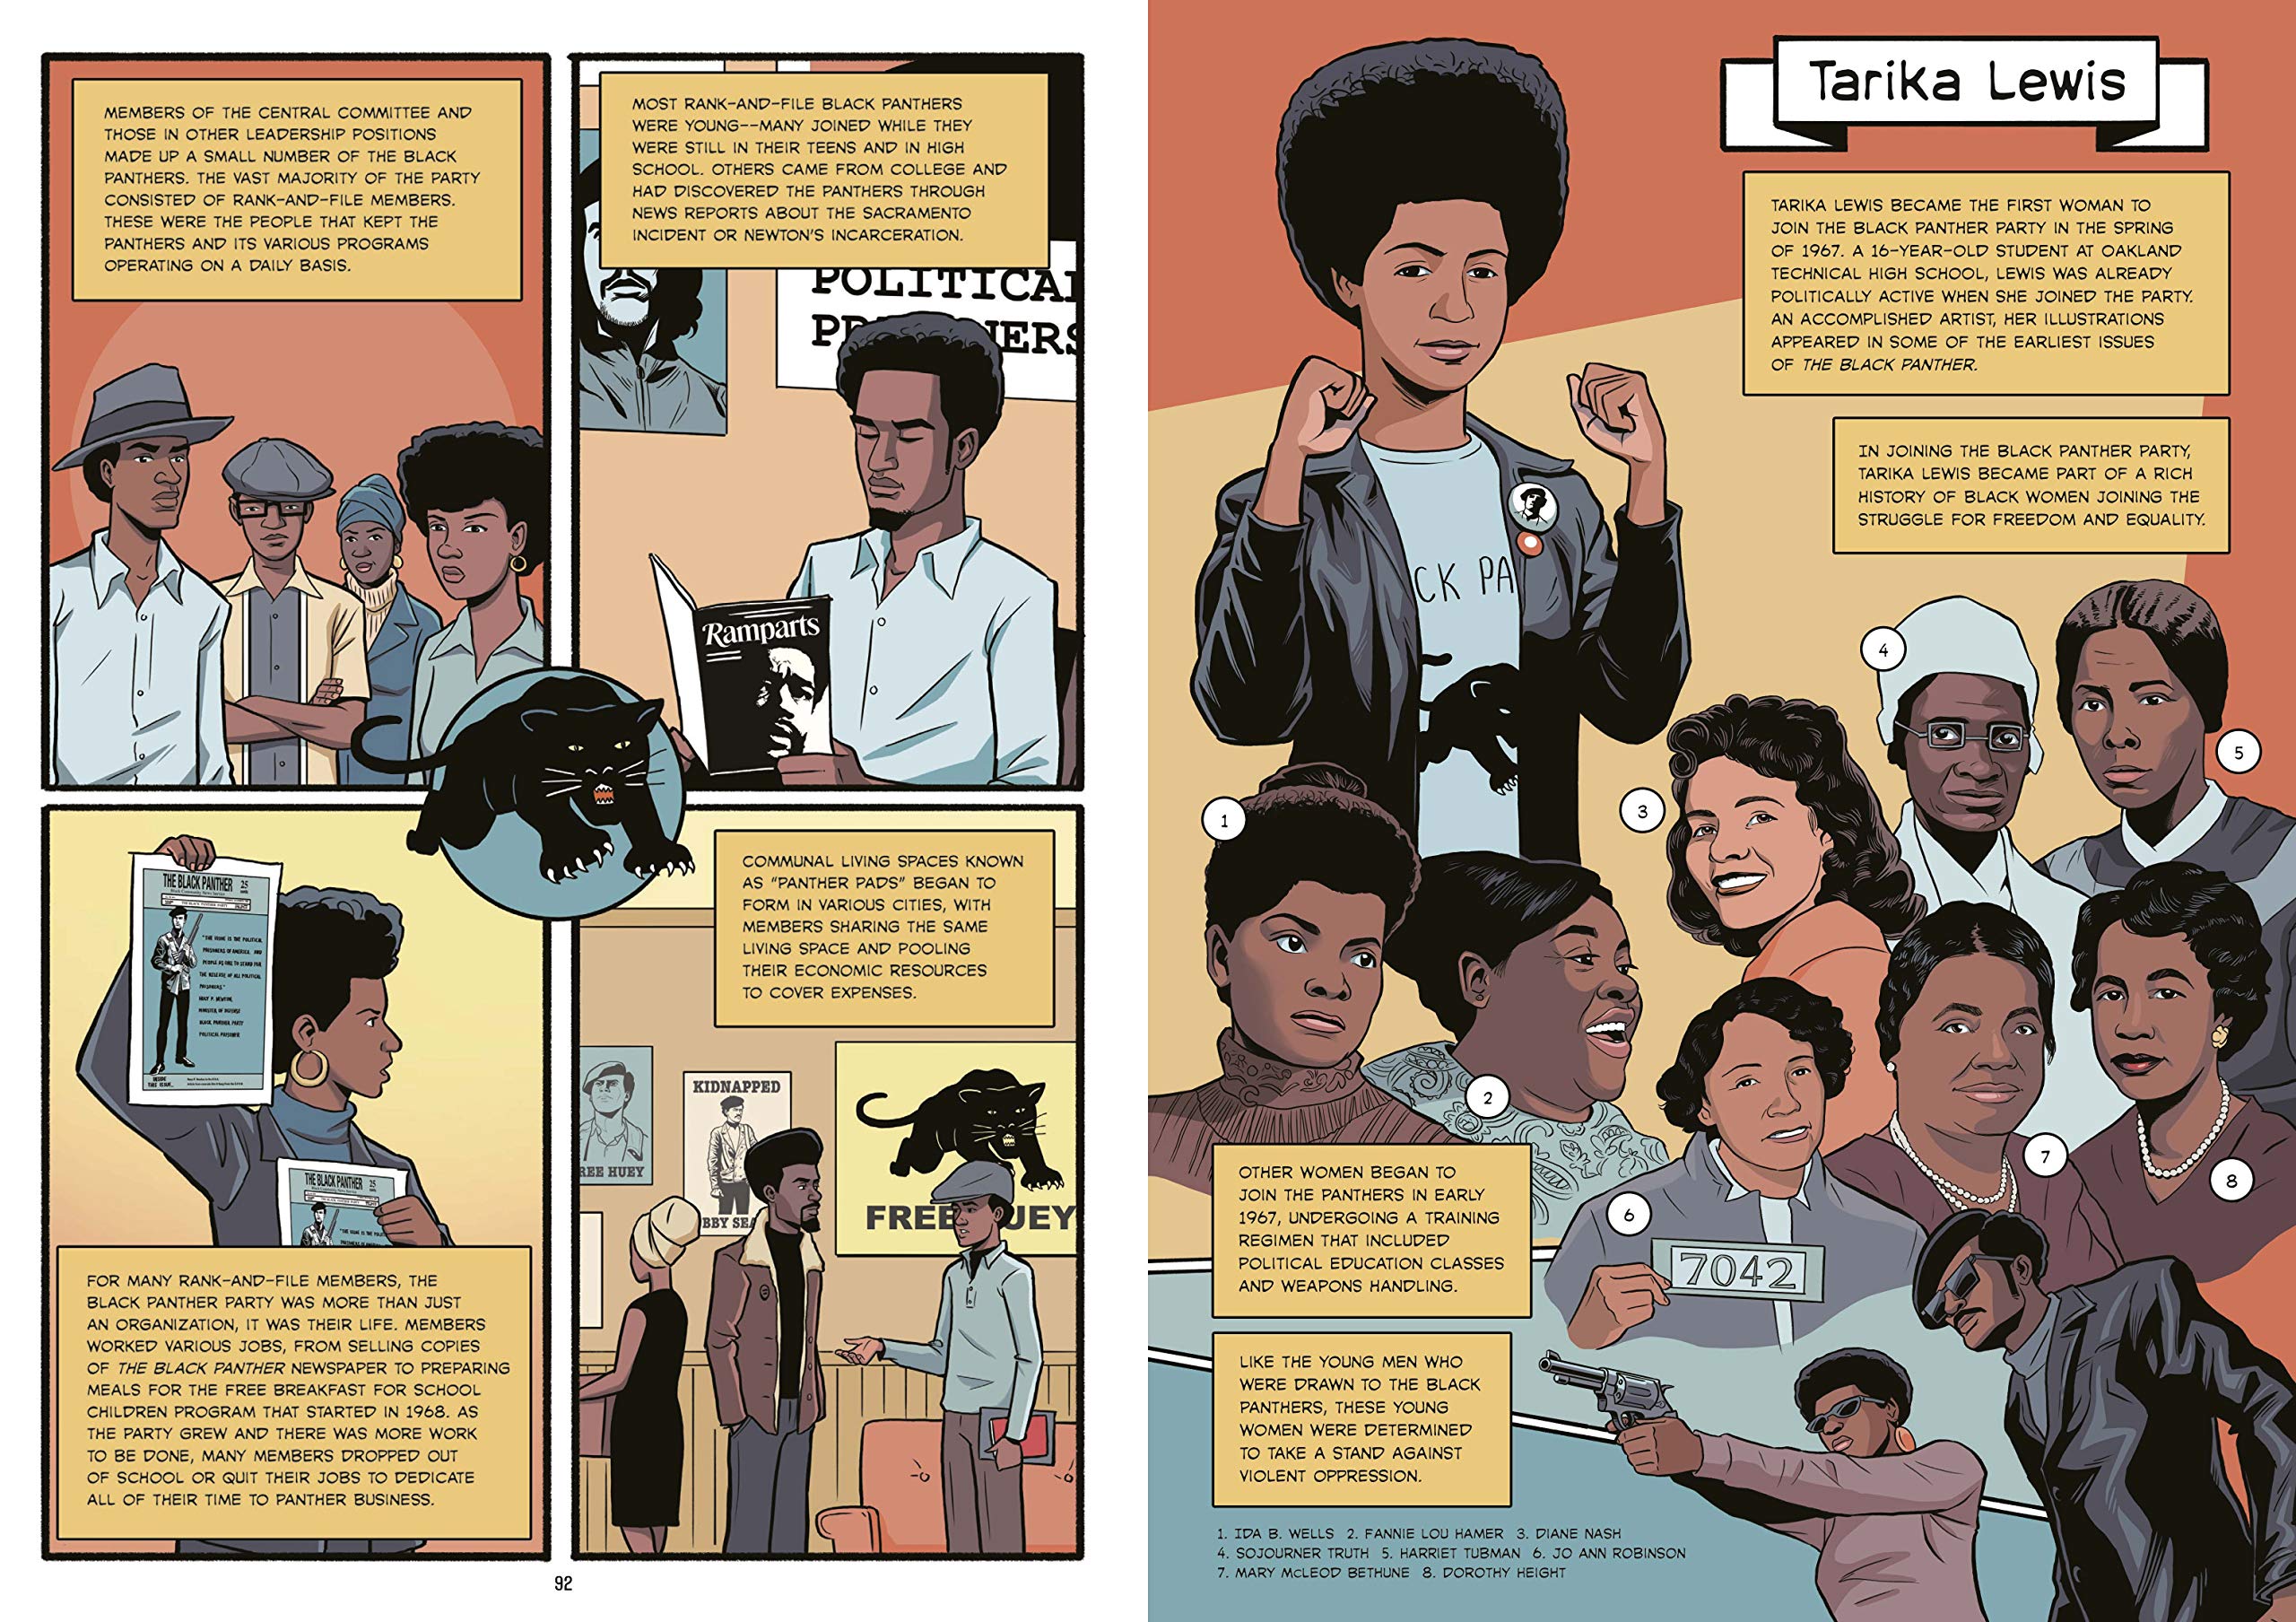 The Black Panther Party: A Graphic Novel History